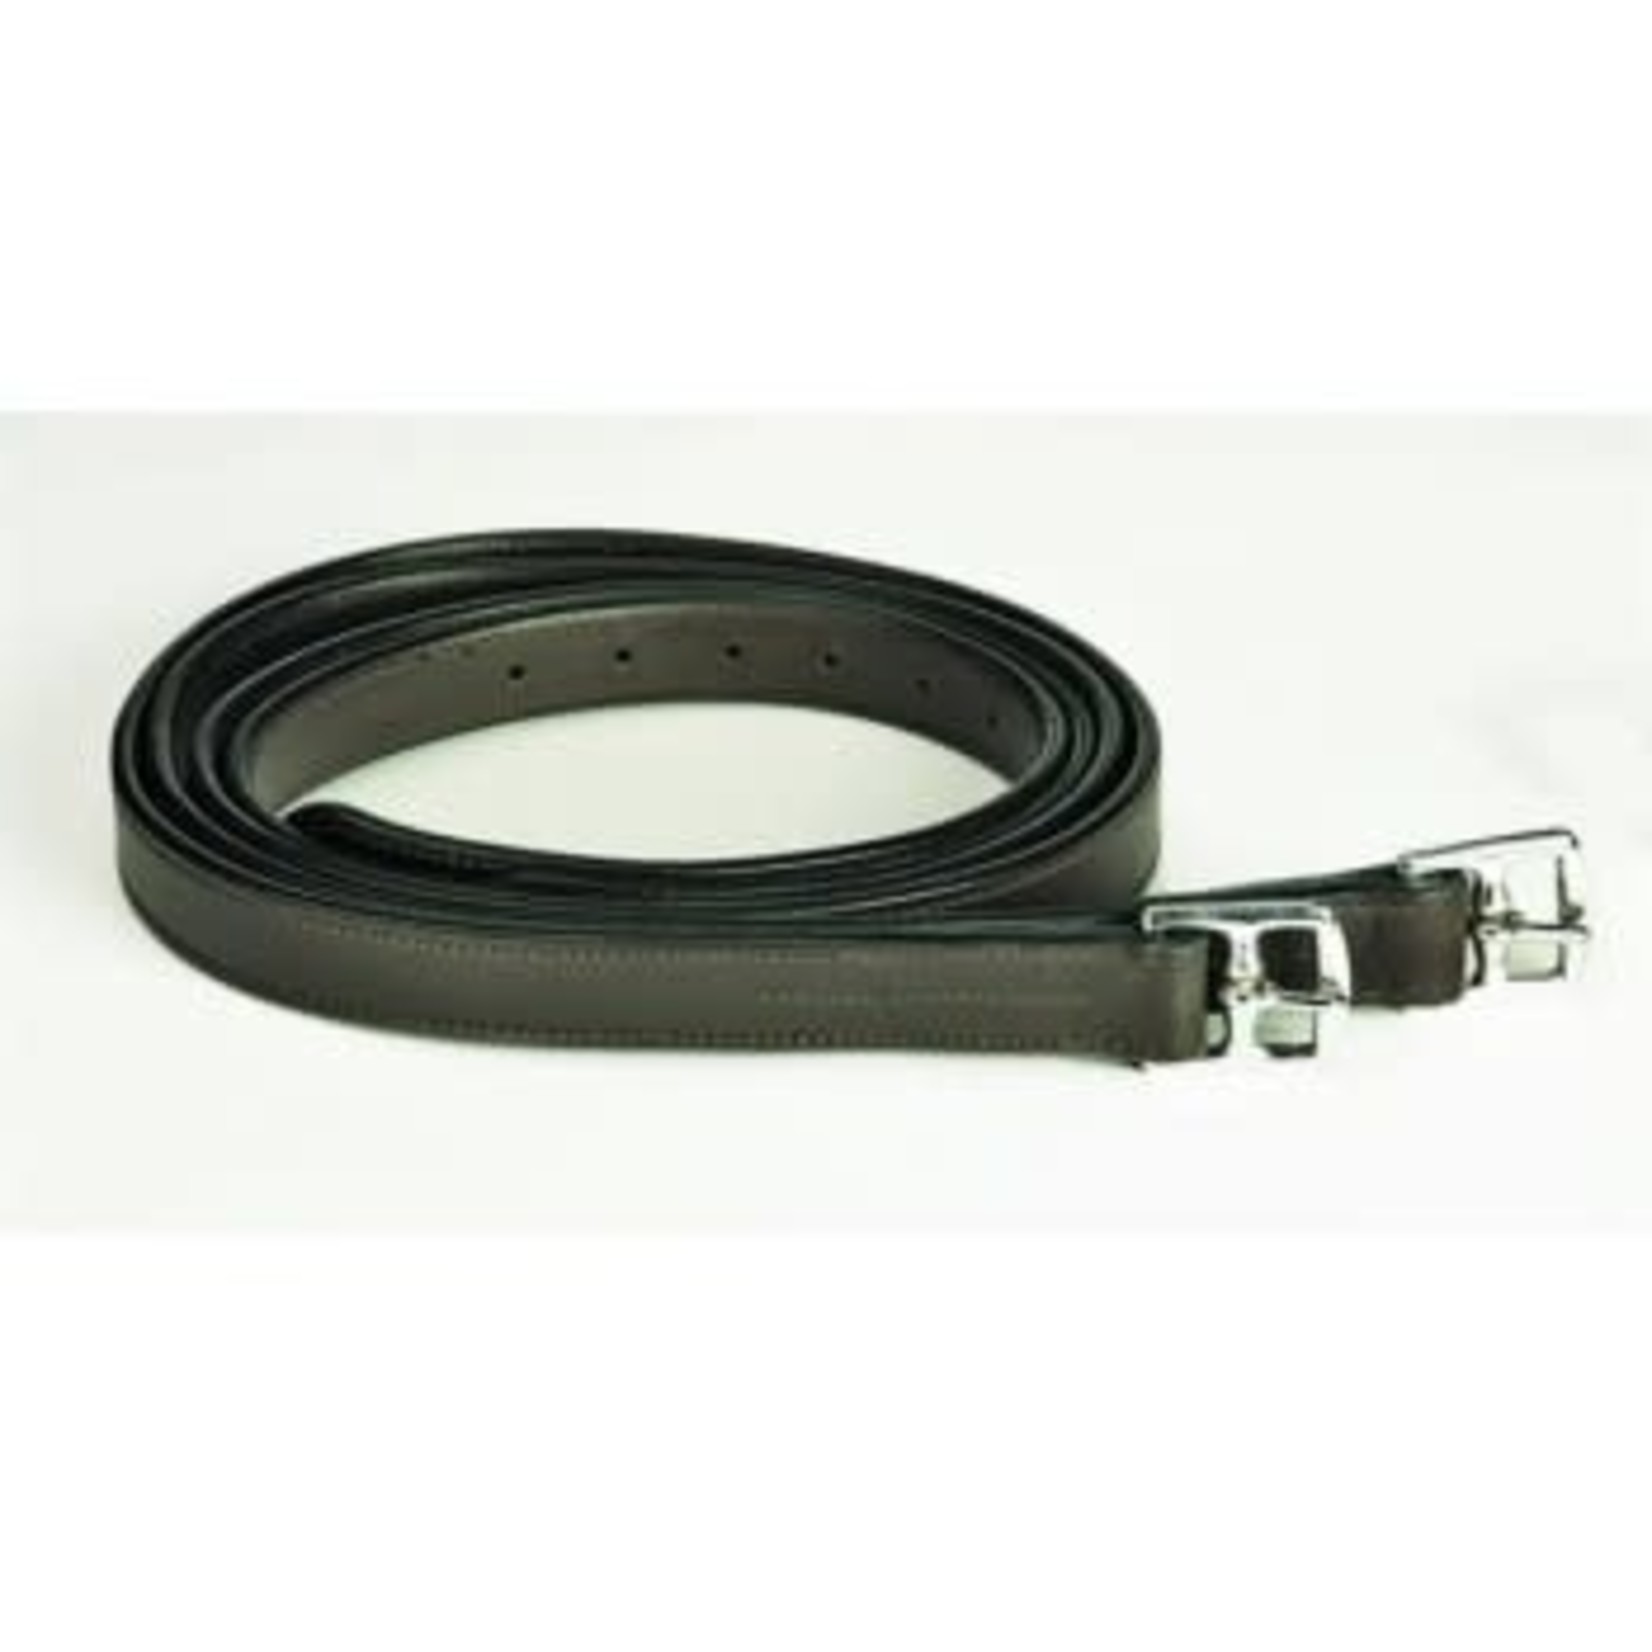 Imperial Stirrup Leathers